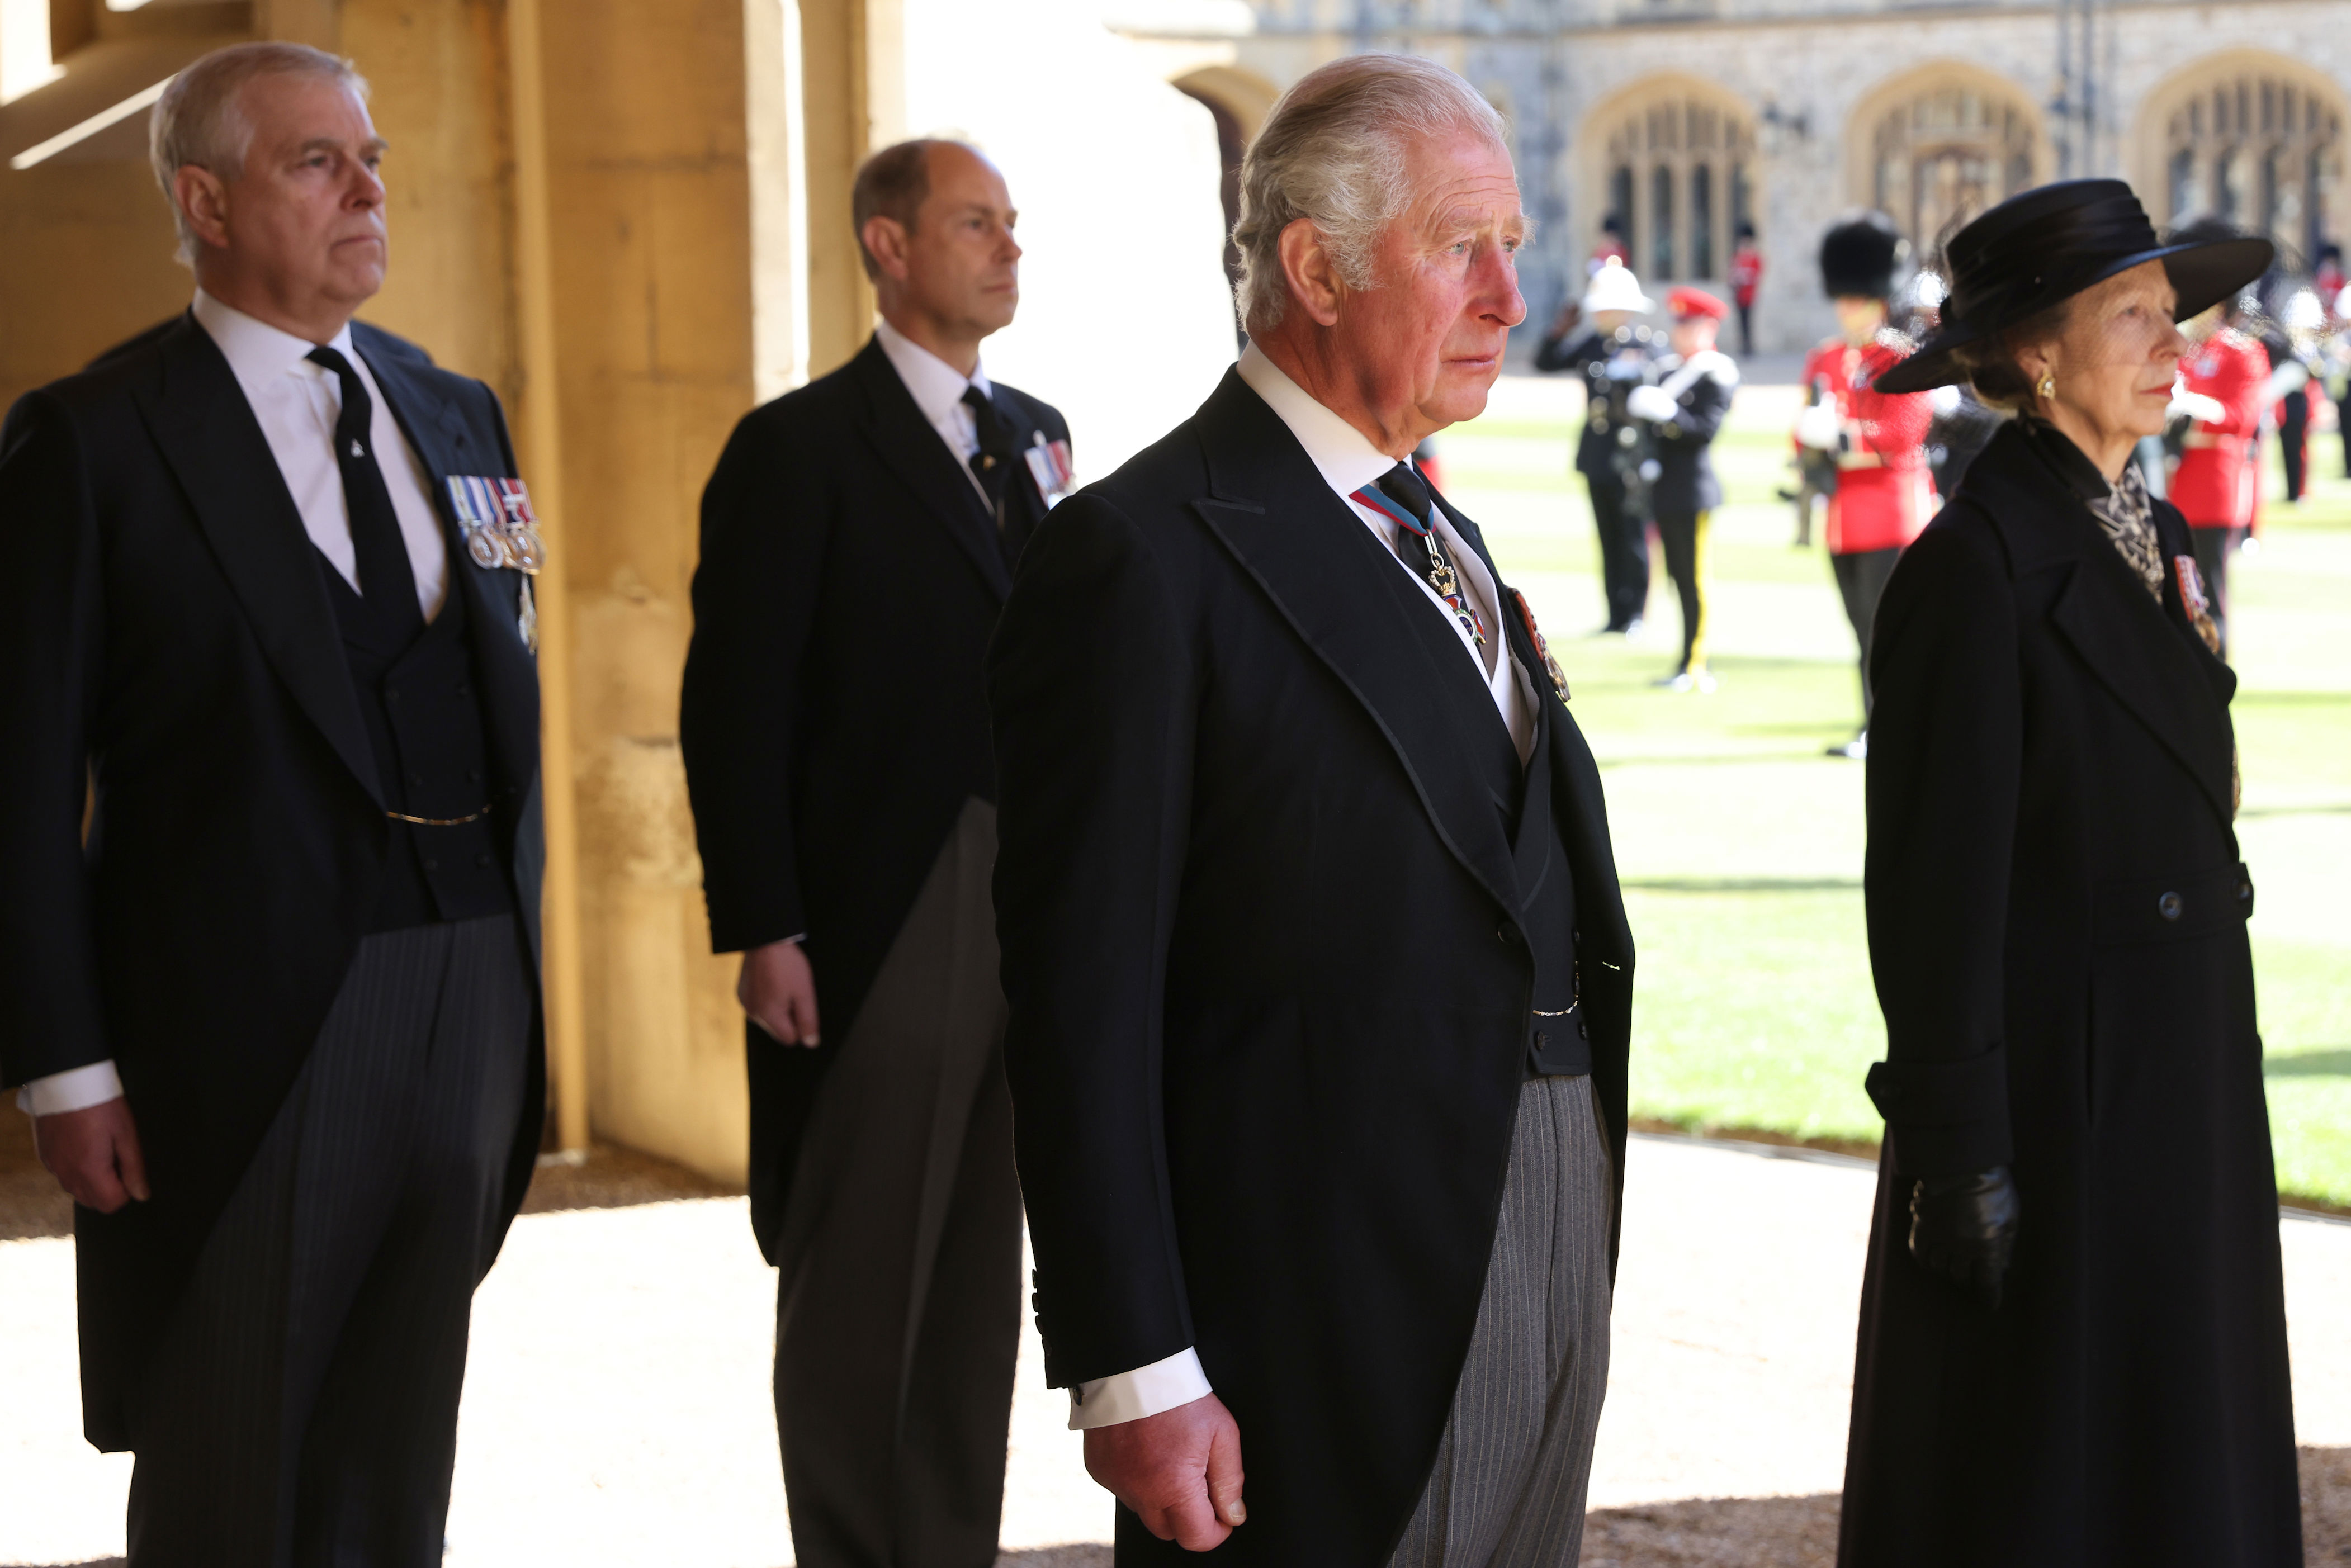 <p>Prince Philip's four children -- Prince Andrew, Duke of York; Prince Edward, Earl of Wessex; Prince Charles, Prince of Wales (now King Charles III); and Princess Anne, the Princess Royal -- are seen right before they began to walk in their father's funeral procession at Windsor Castle on April 17, 2021.</p>